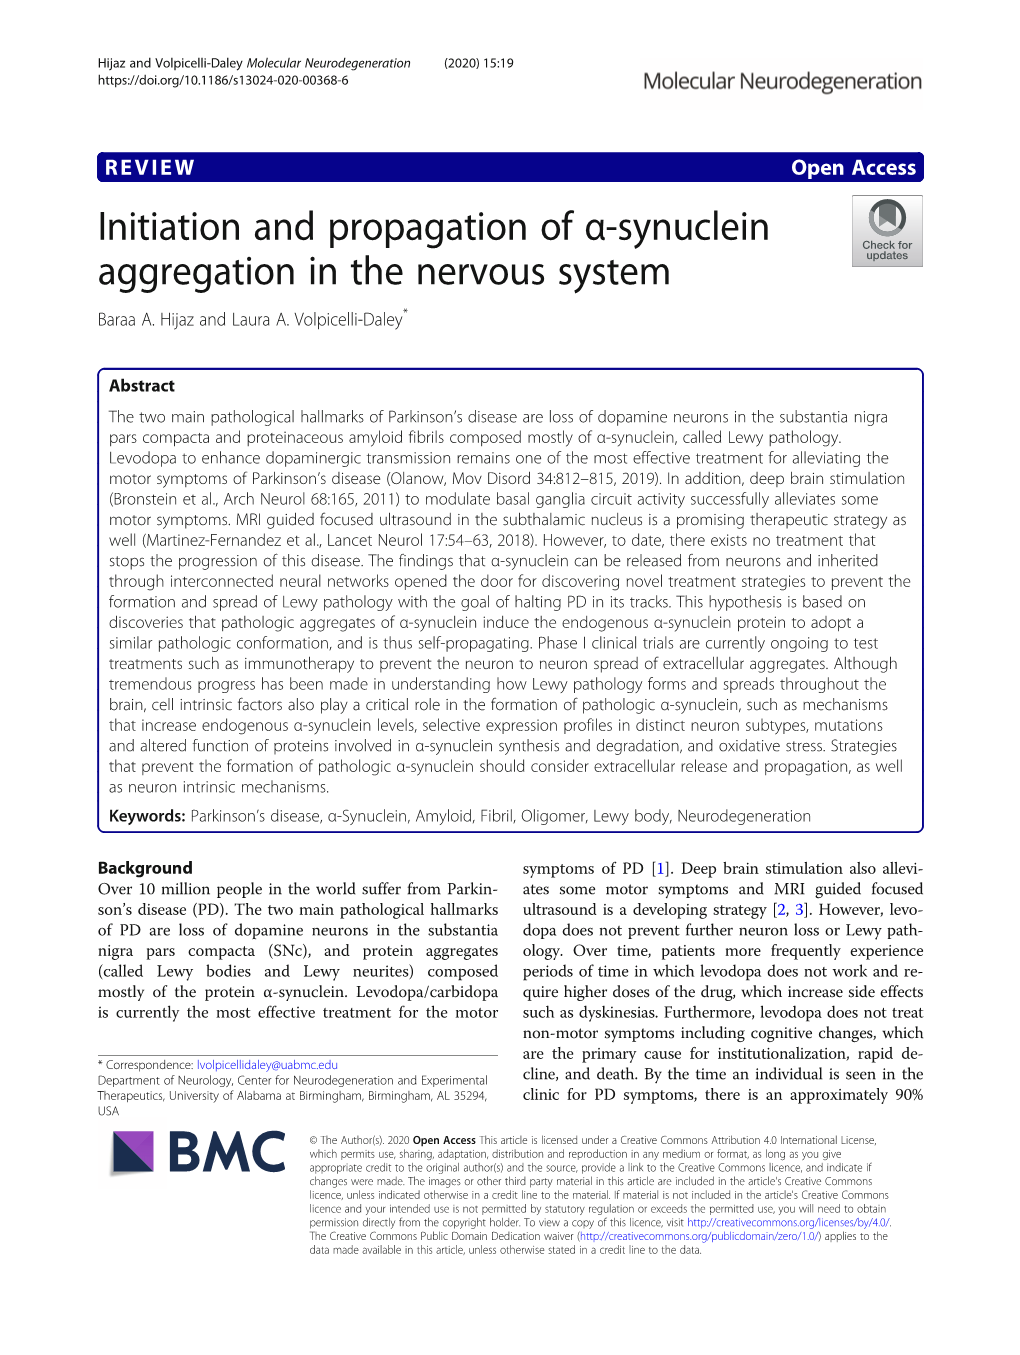 Initiation and Propagation of Α-Synuclein Aggregation in the Nervous System Baraa A